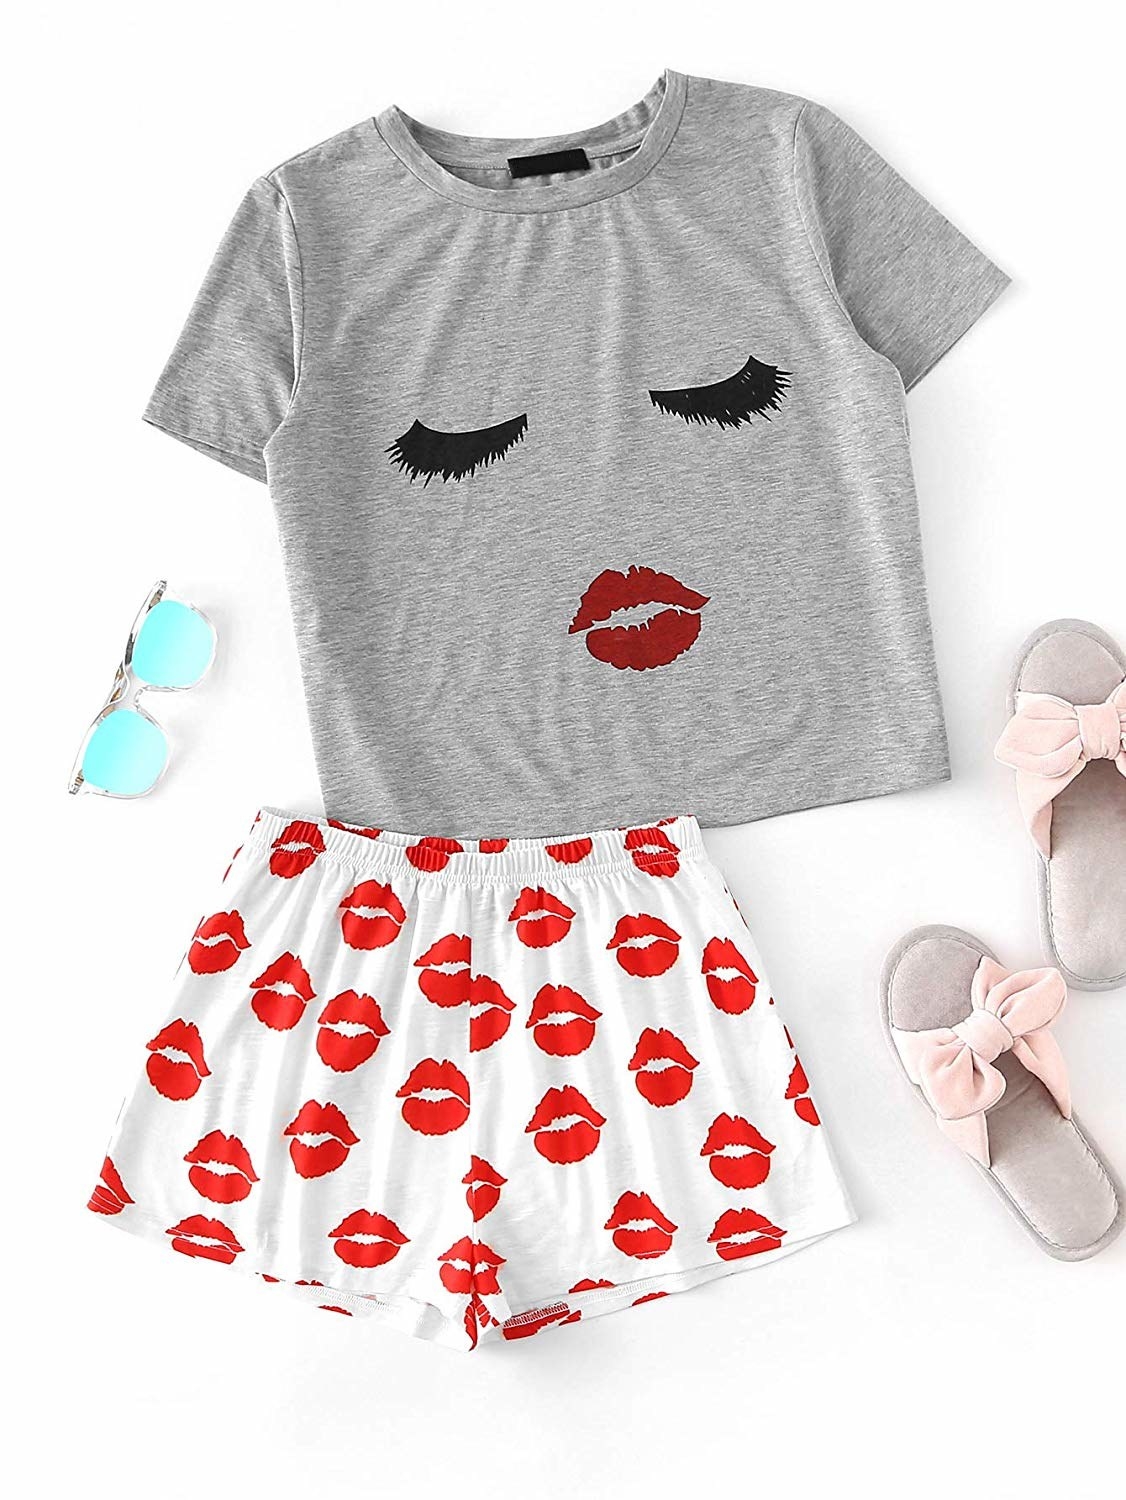 cute outfits to sleep in